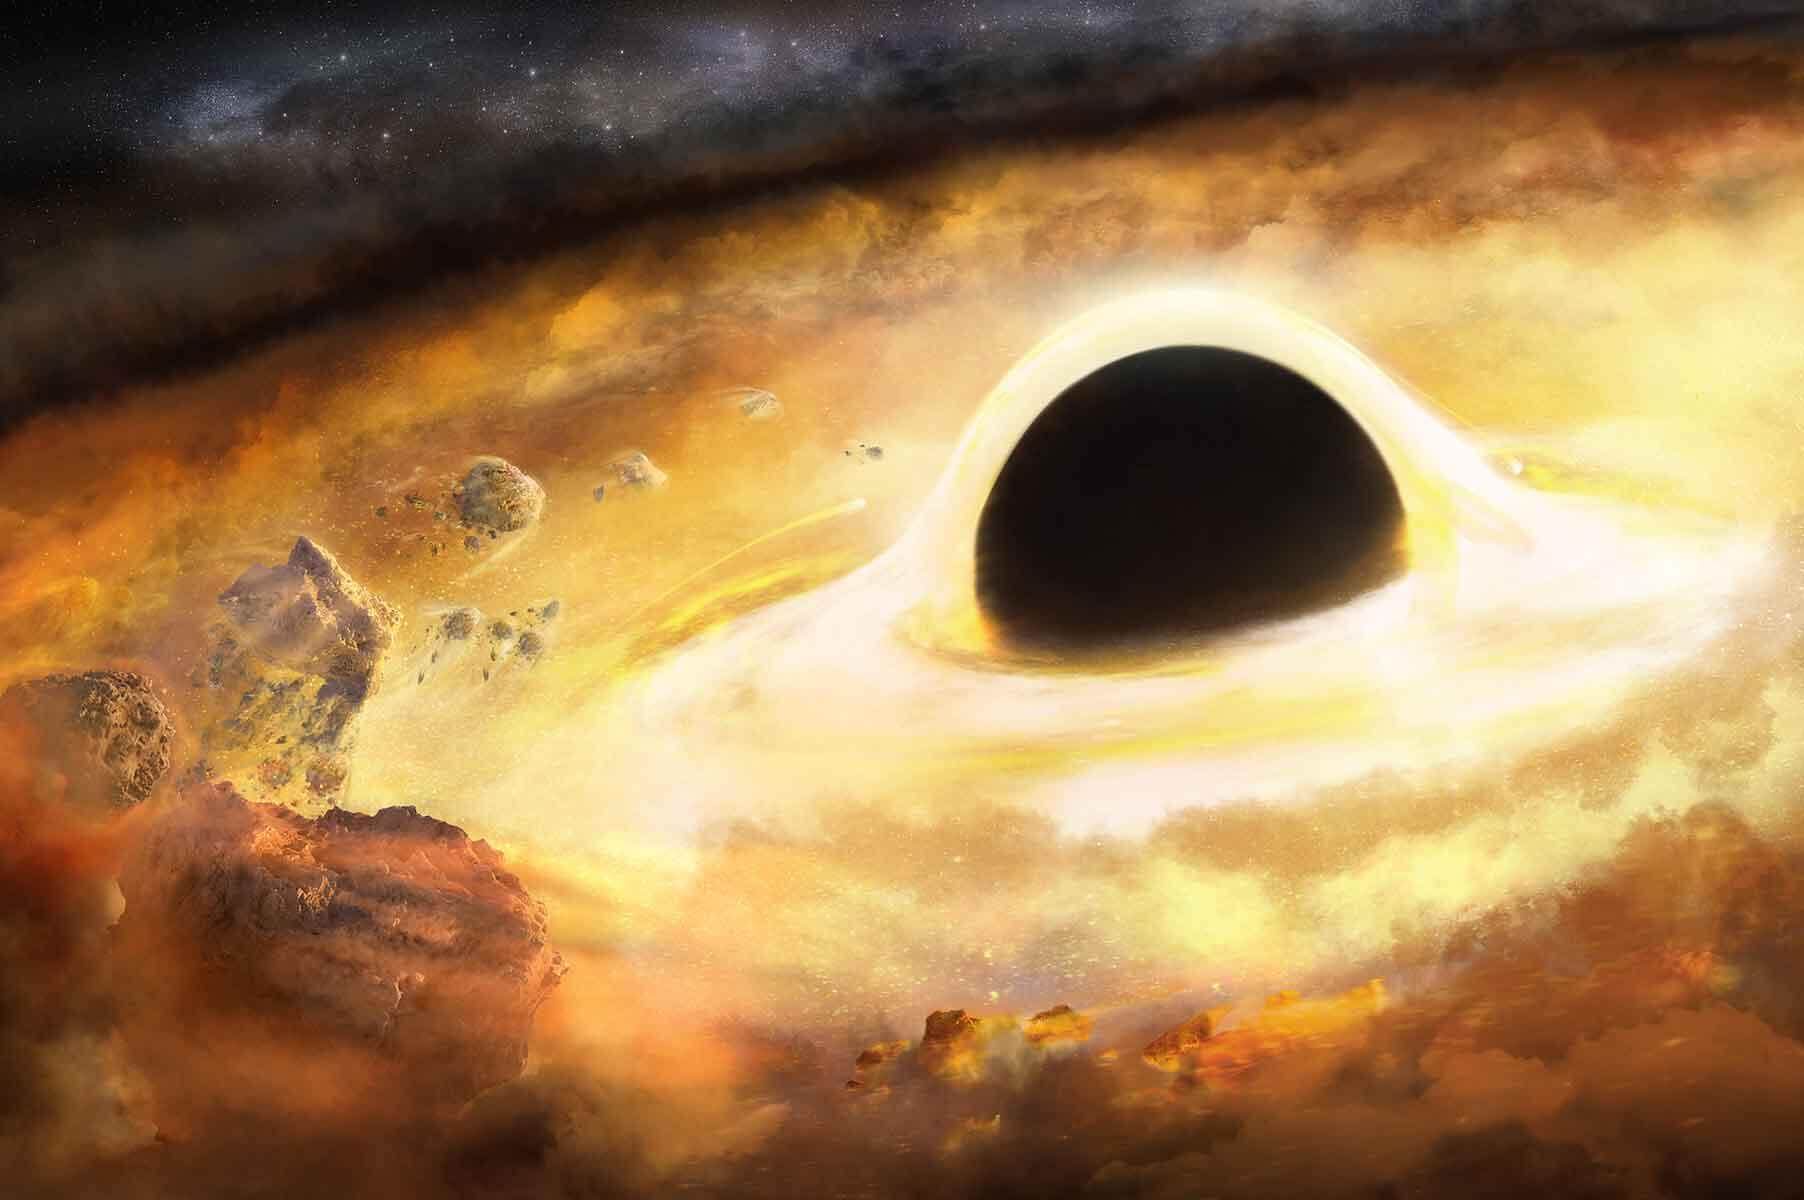 Artistic rendering of a black hole